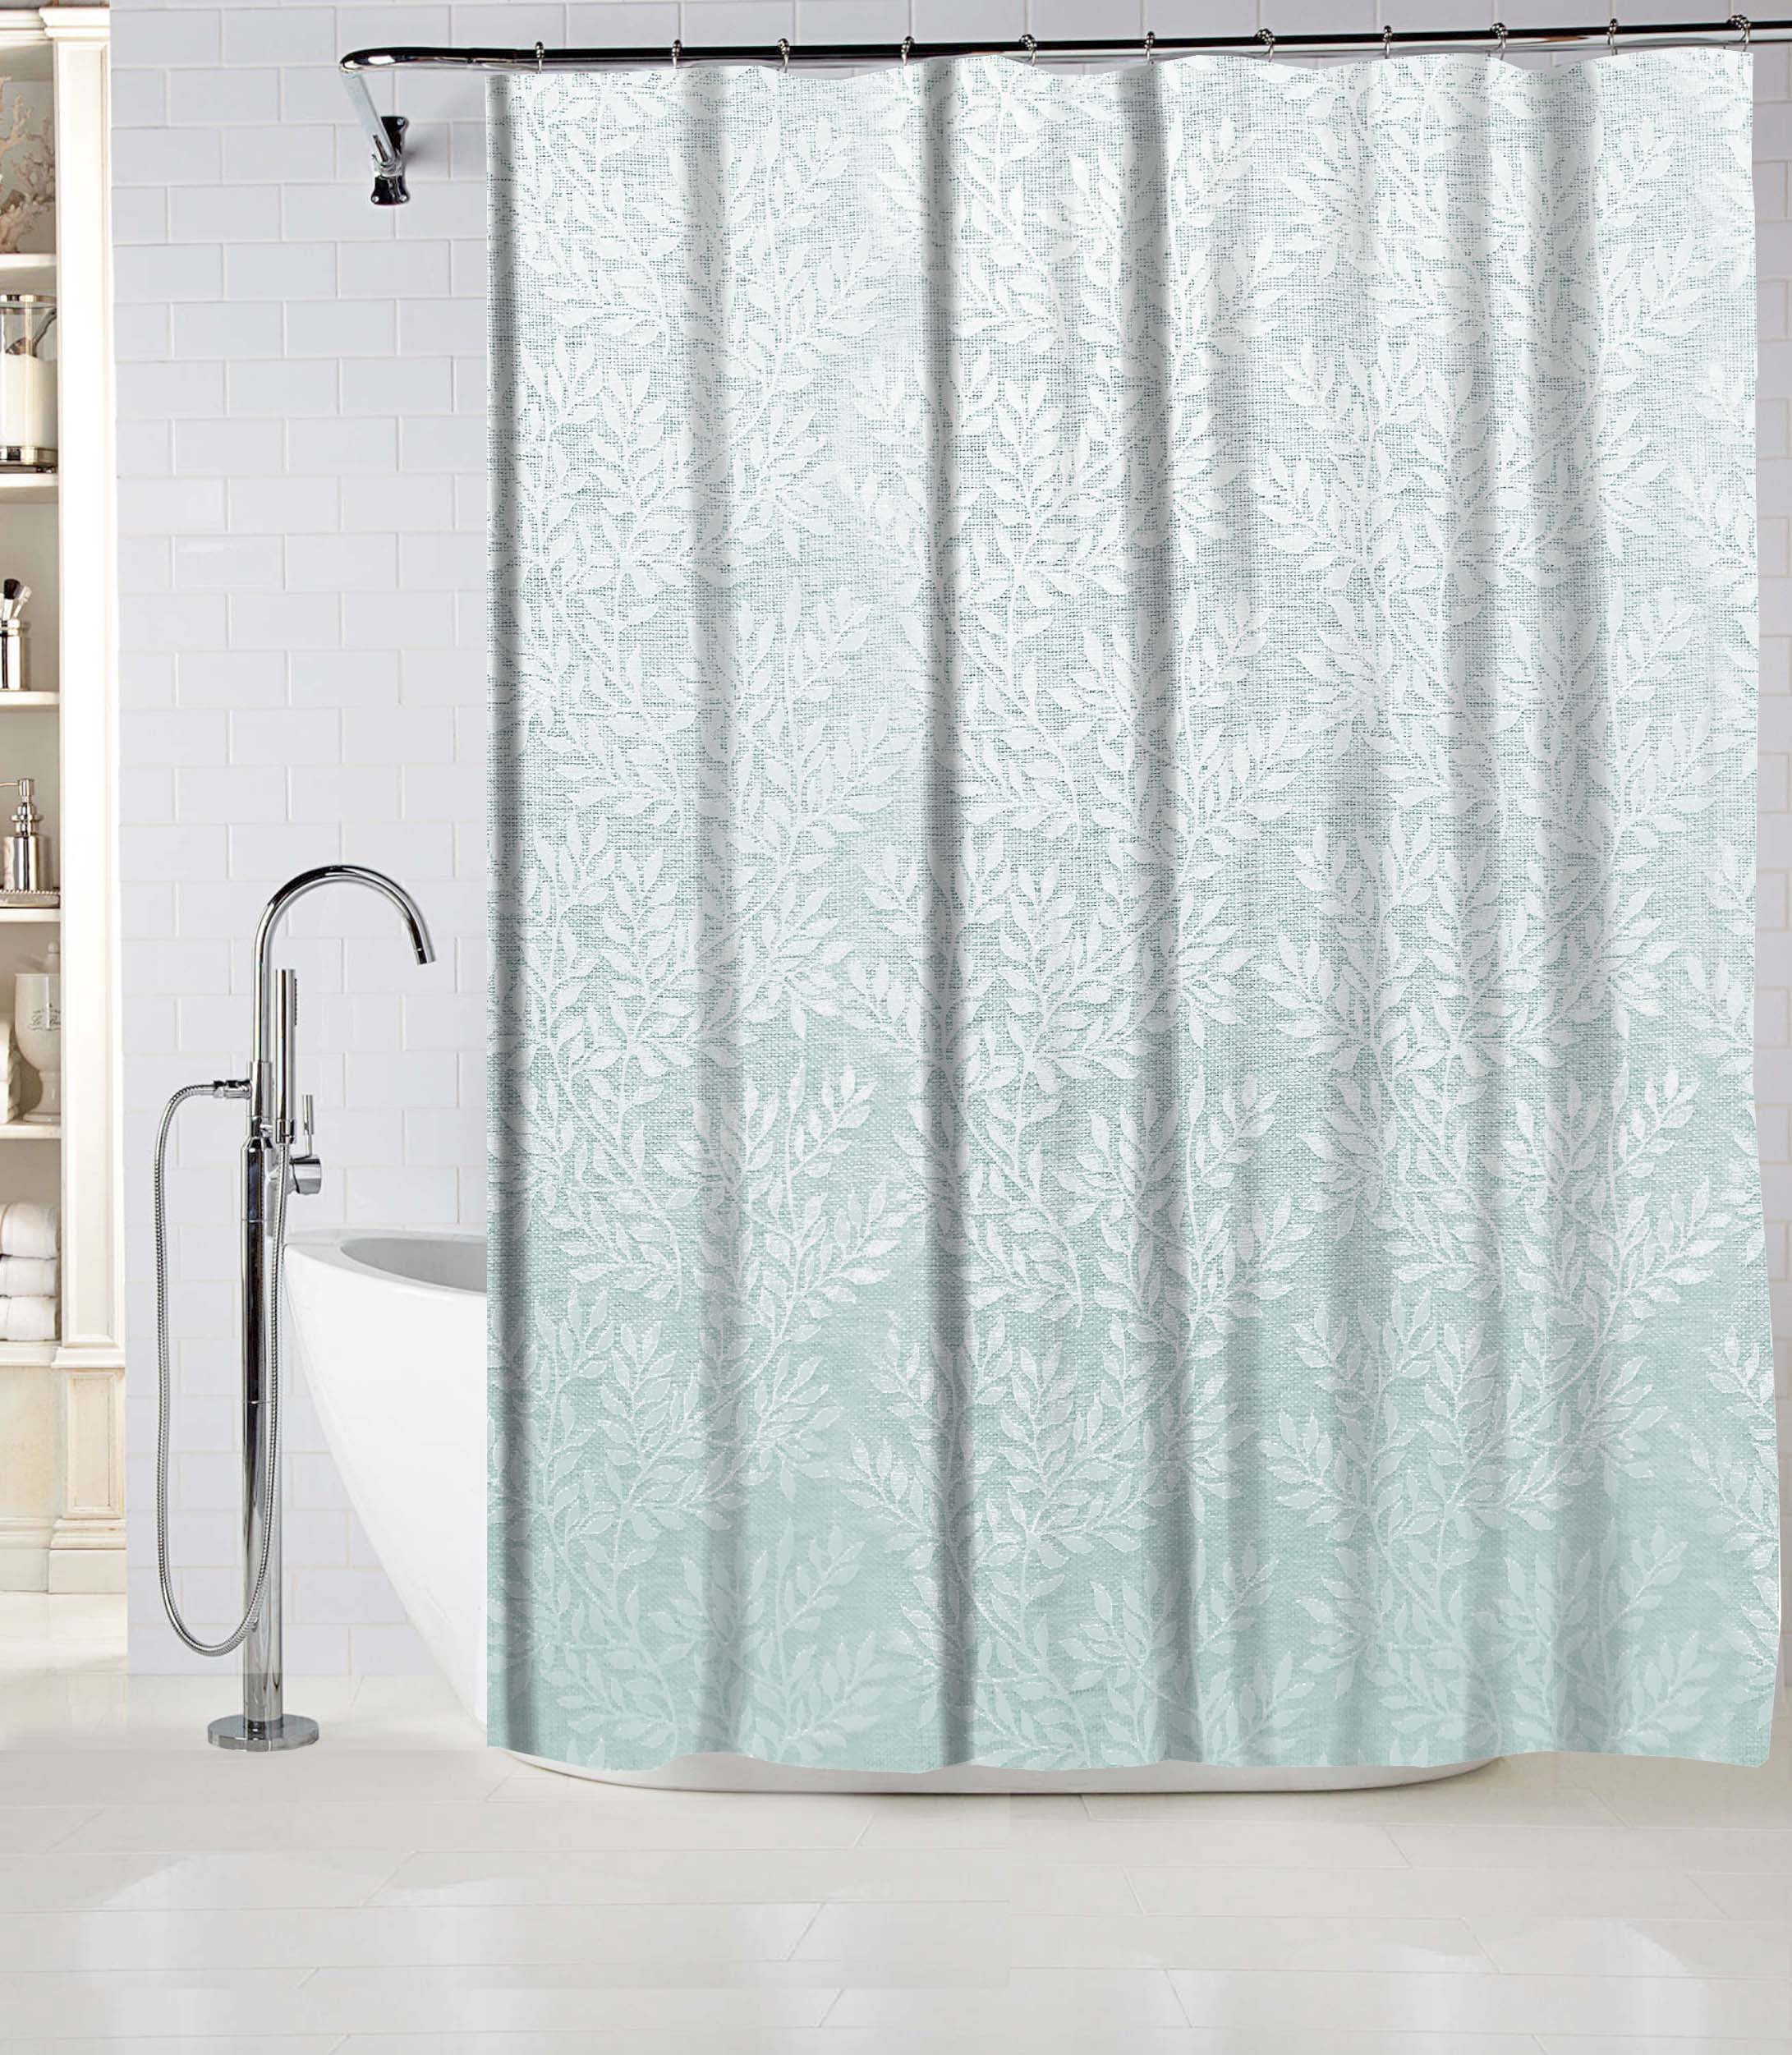 Fabric Shower Curtain, Mainstays Water Repellent 70 X 72 Fabric Shower Curtain Or Liner